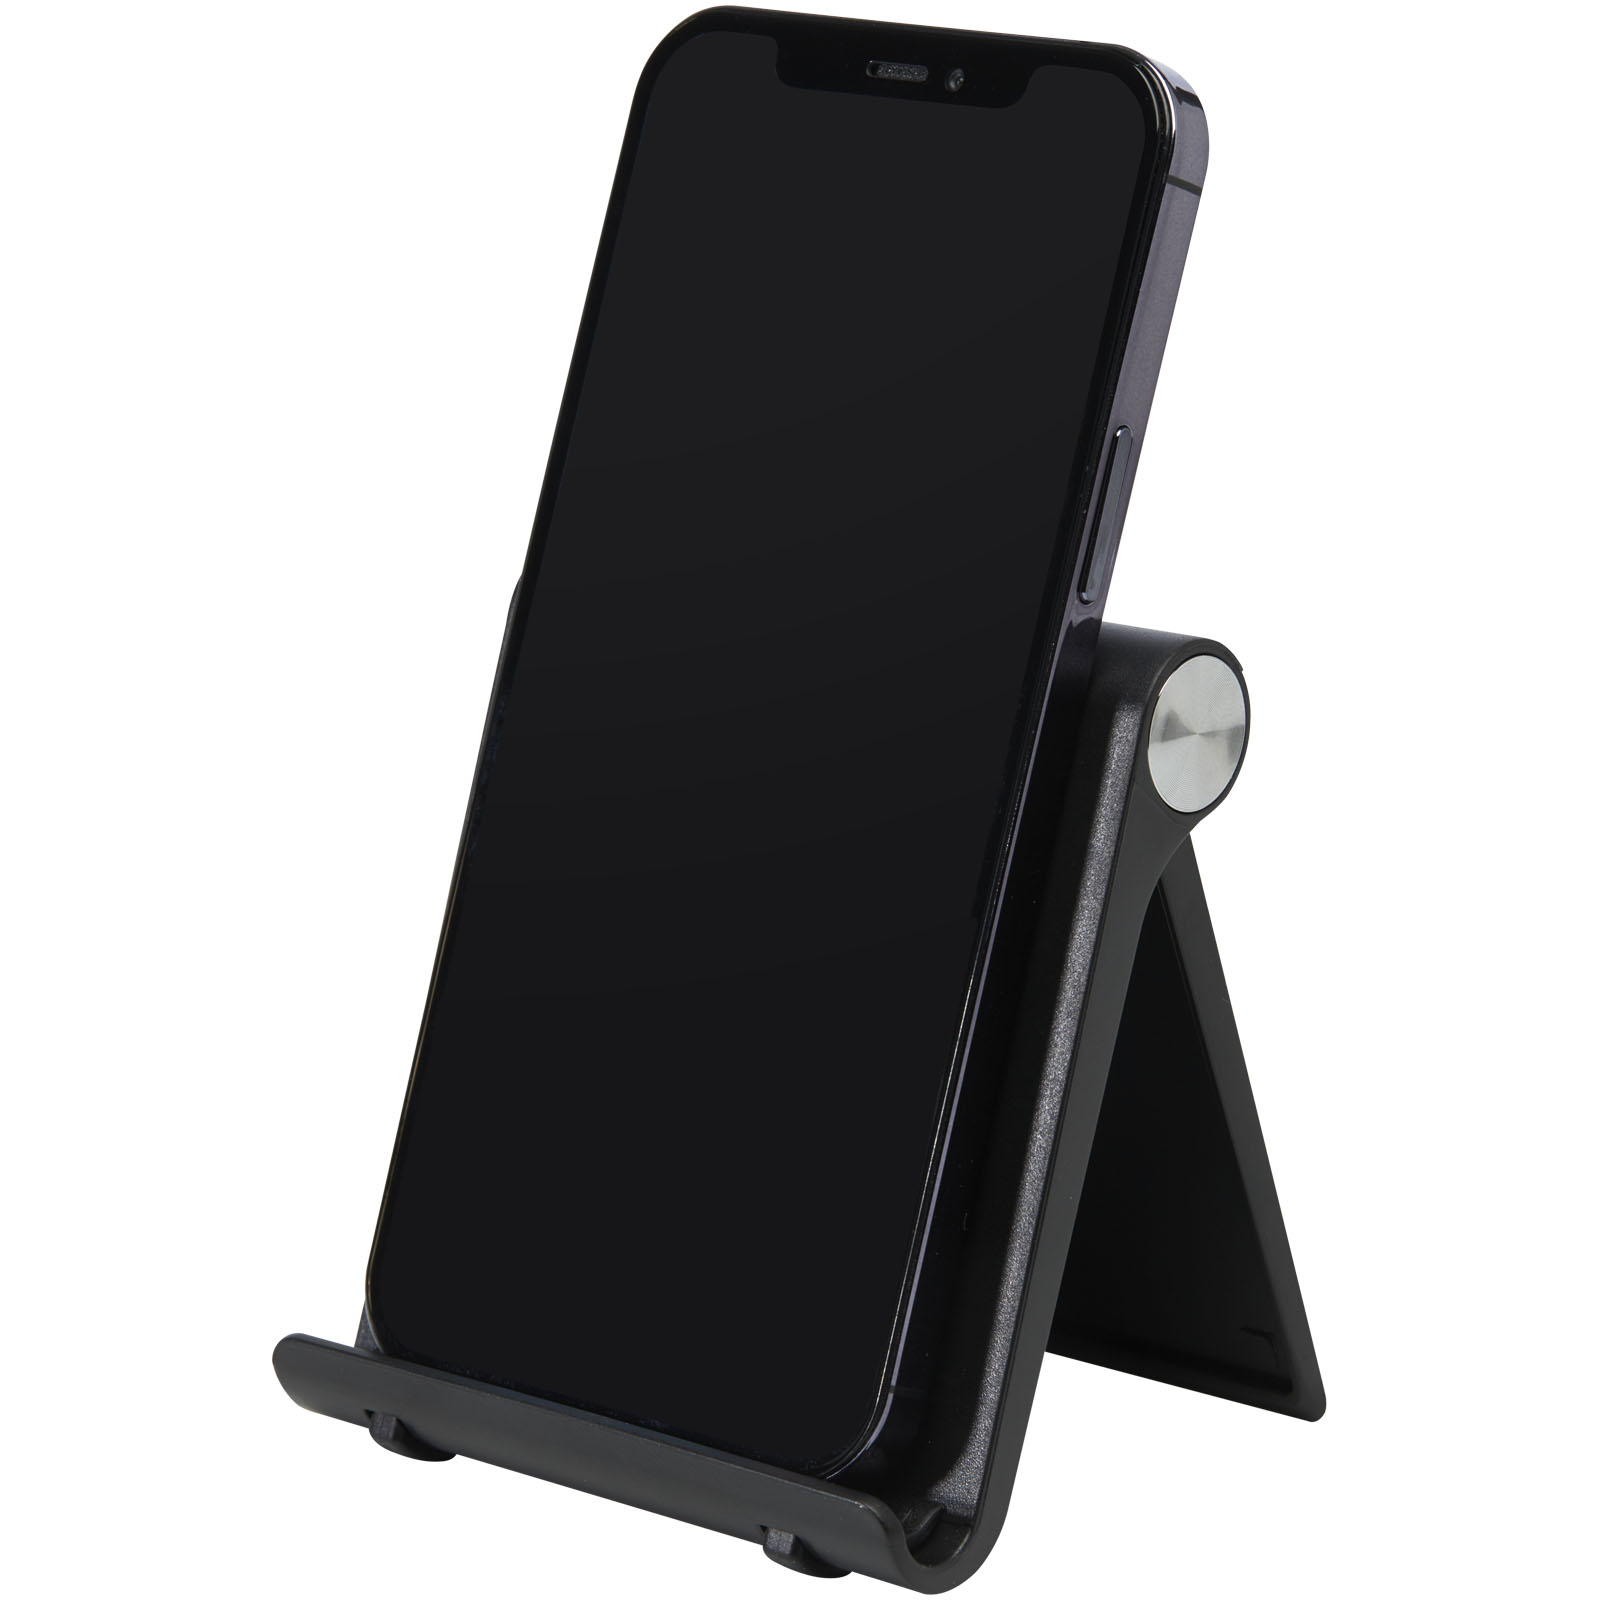 Advertising Stands & Holders - Resty phone and tablet stand